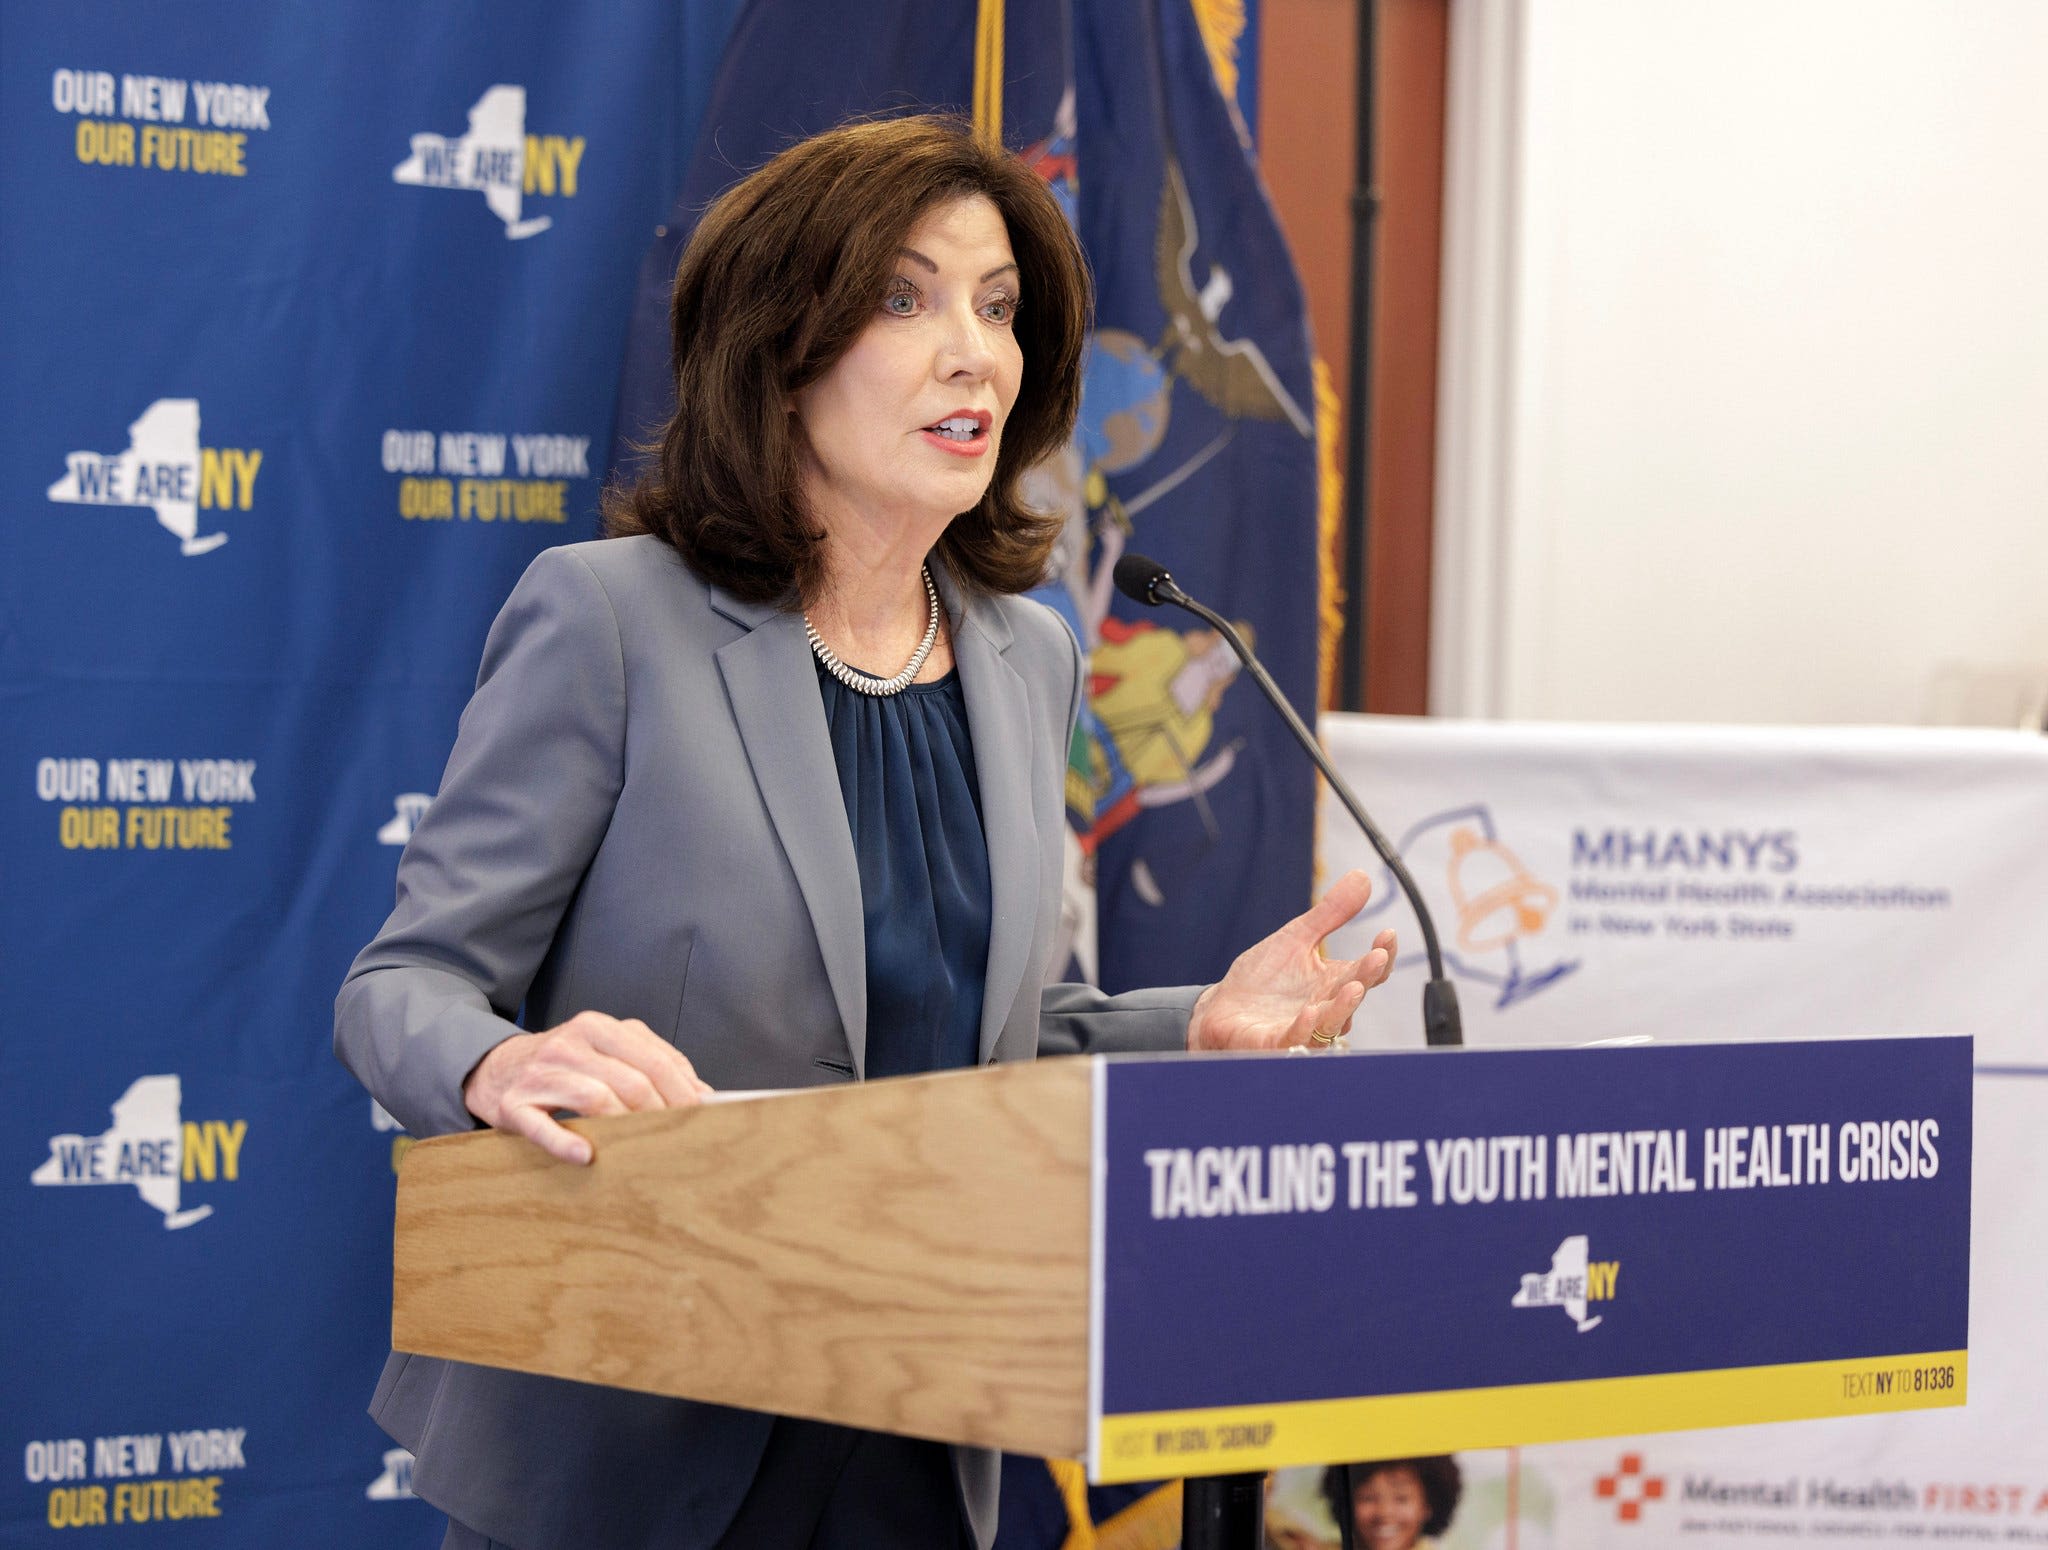 Hochul pushes to ban smartphones in NY schools. Will it help address mental health crisis?